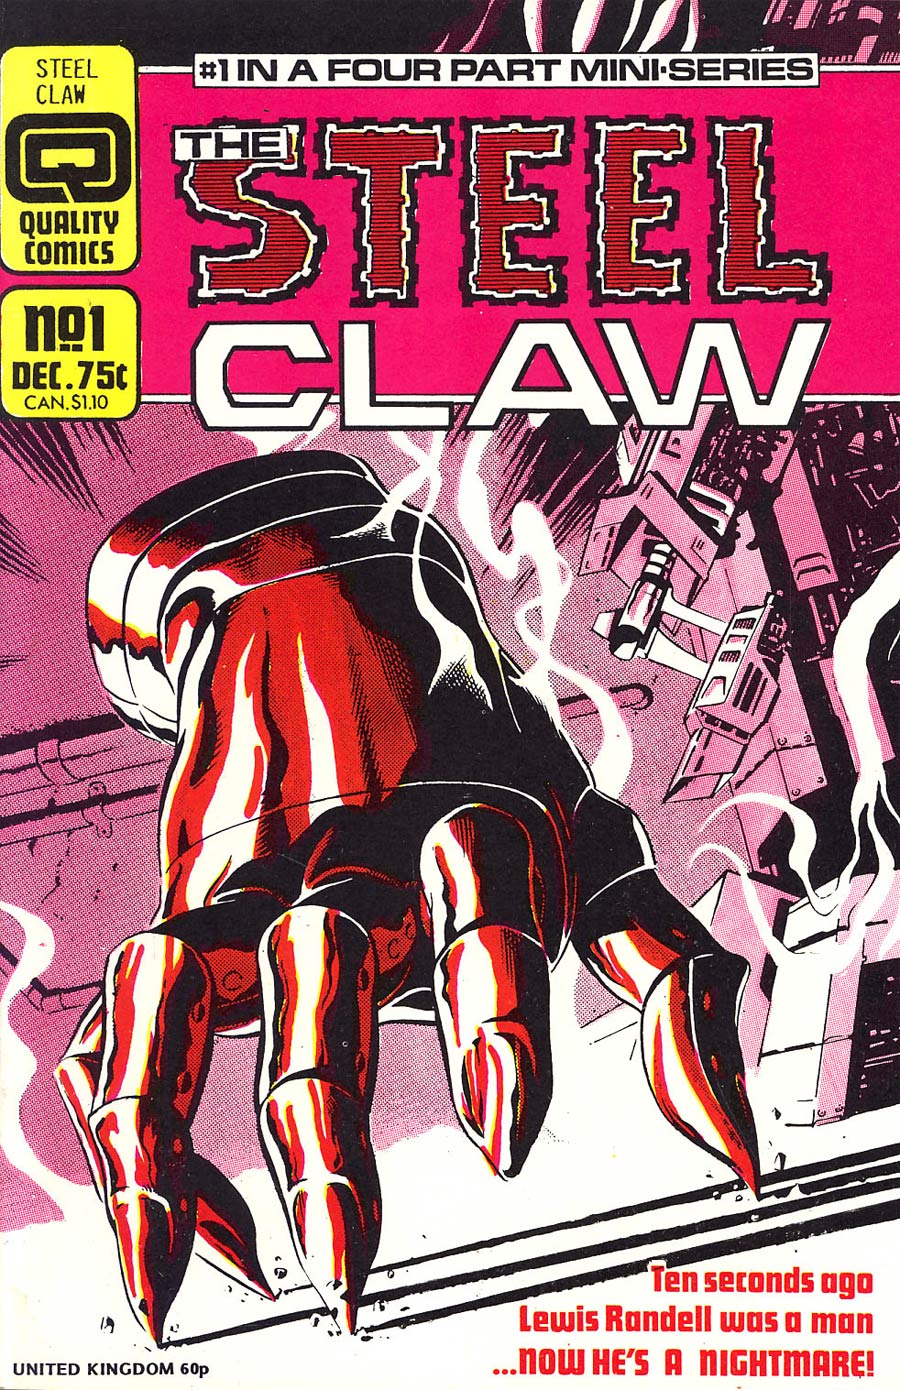 Steel Claw #1